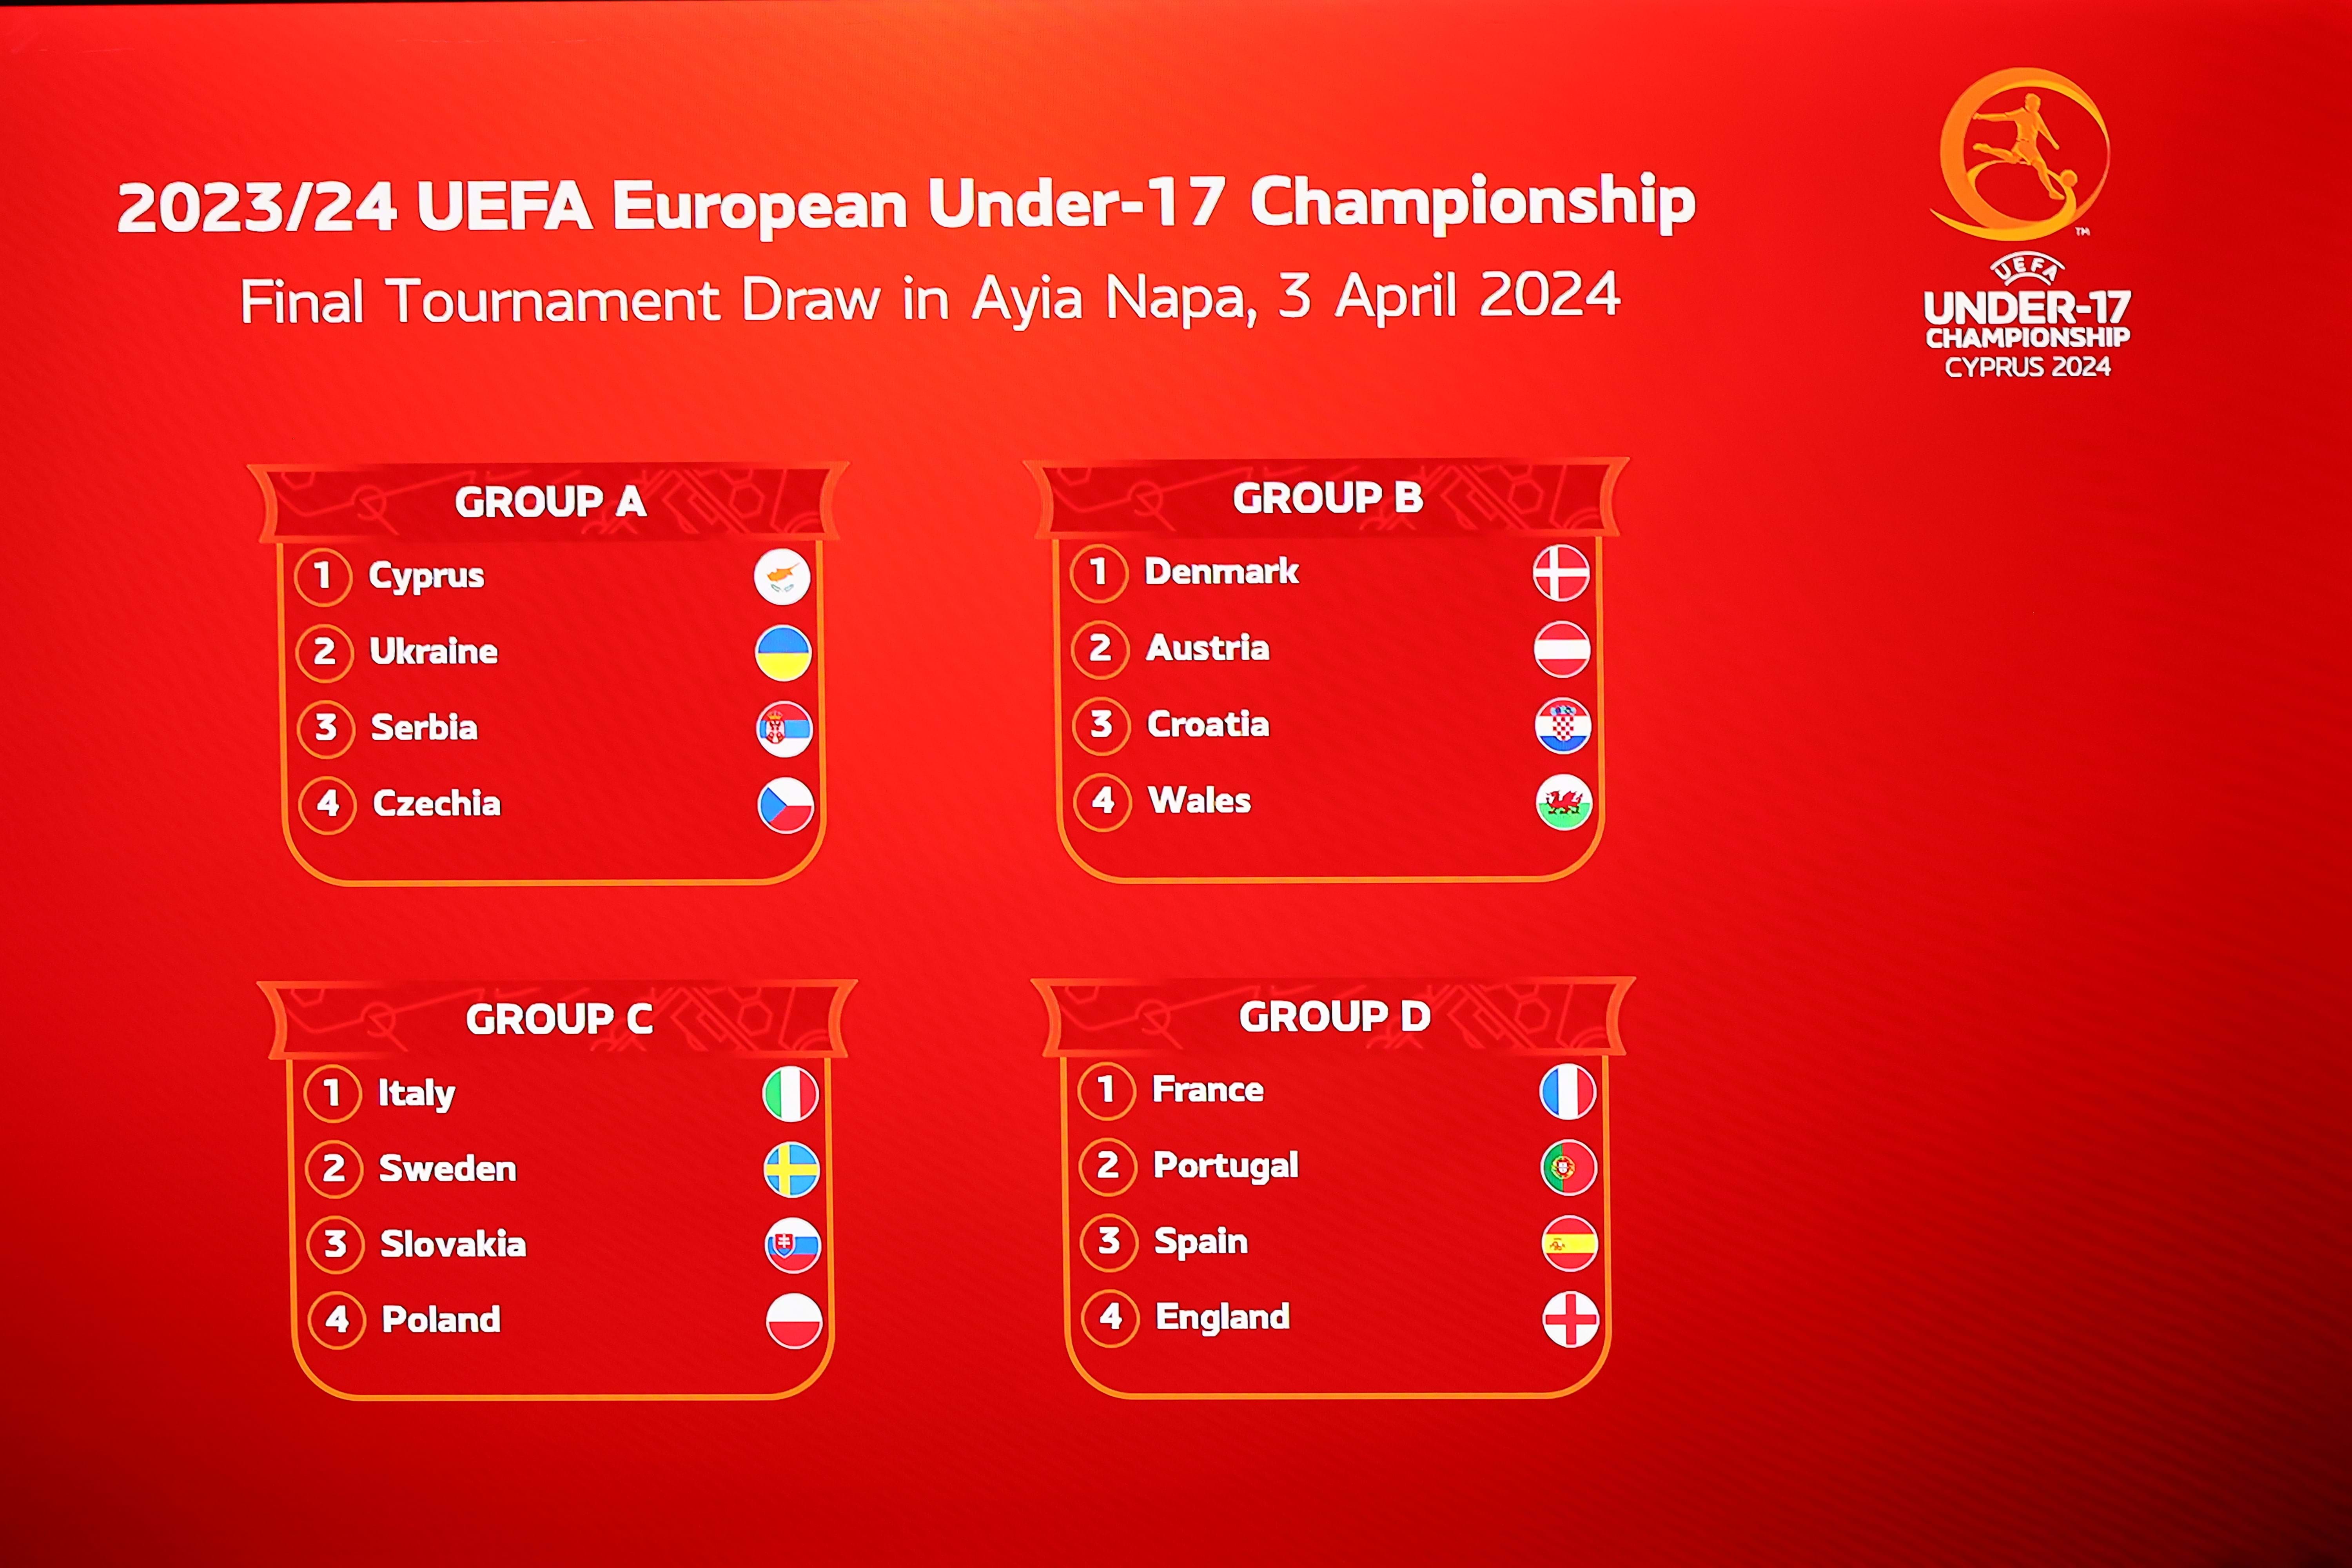 Euros draw: Azzurrini in Group C with Sweden, Slovakia, and Poland